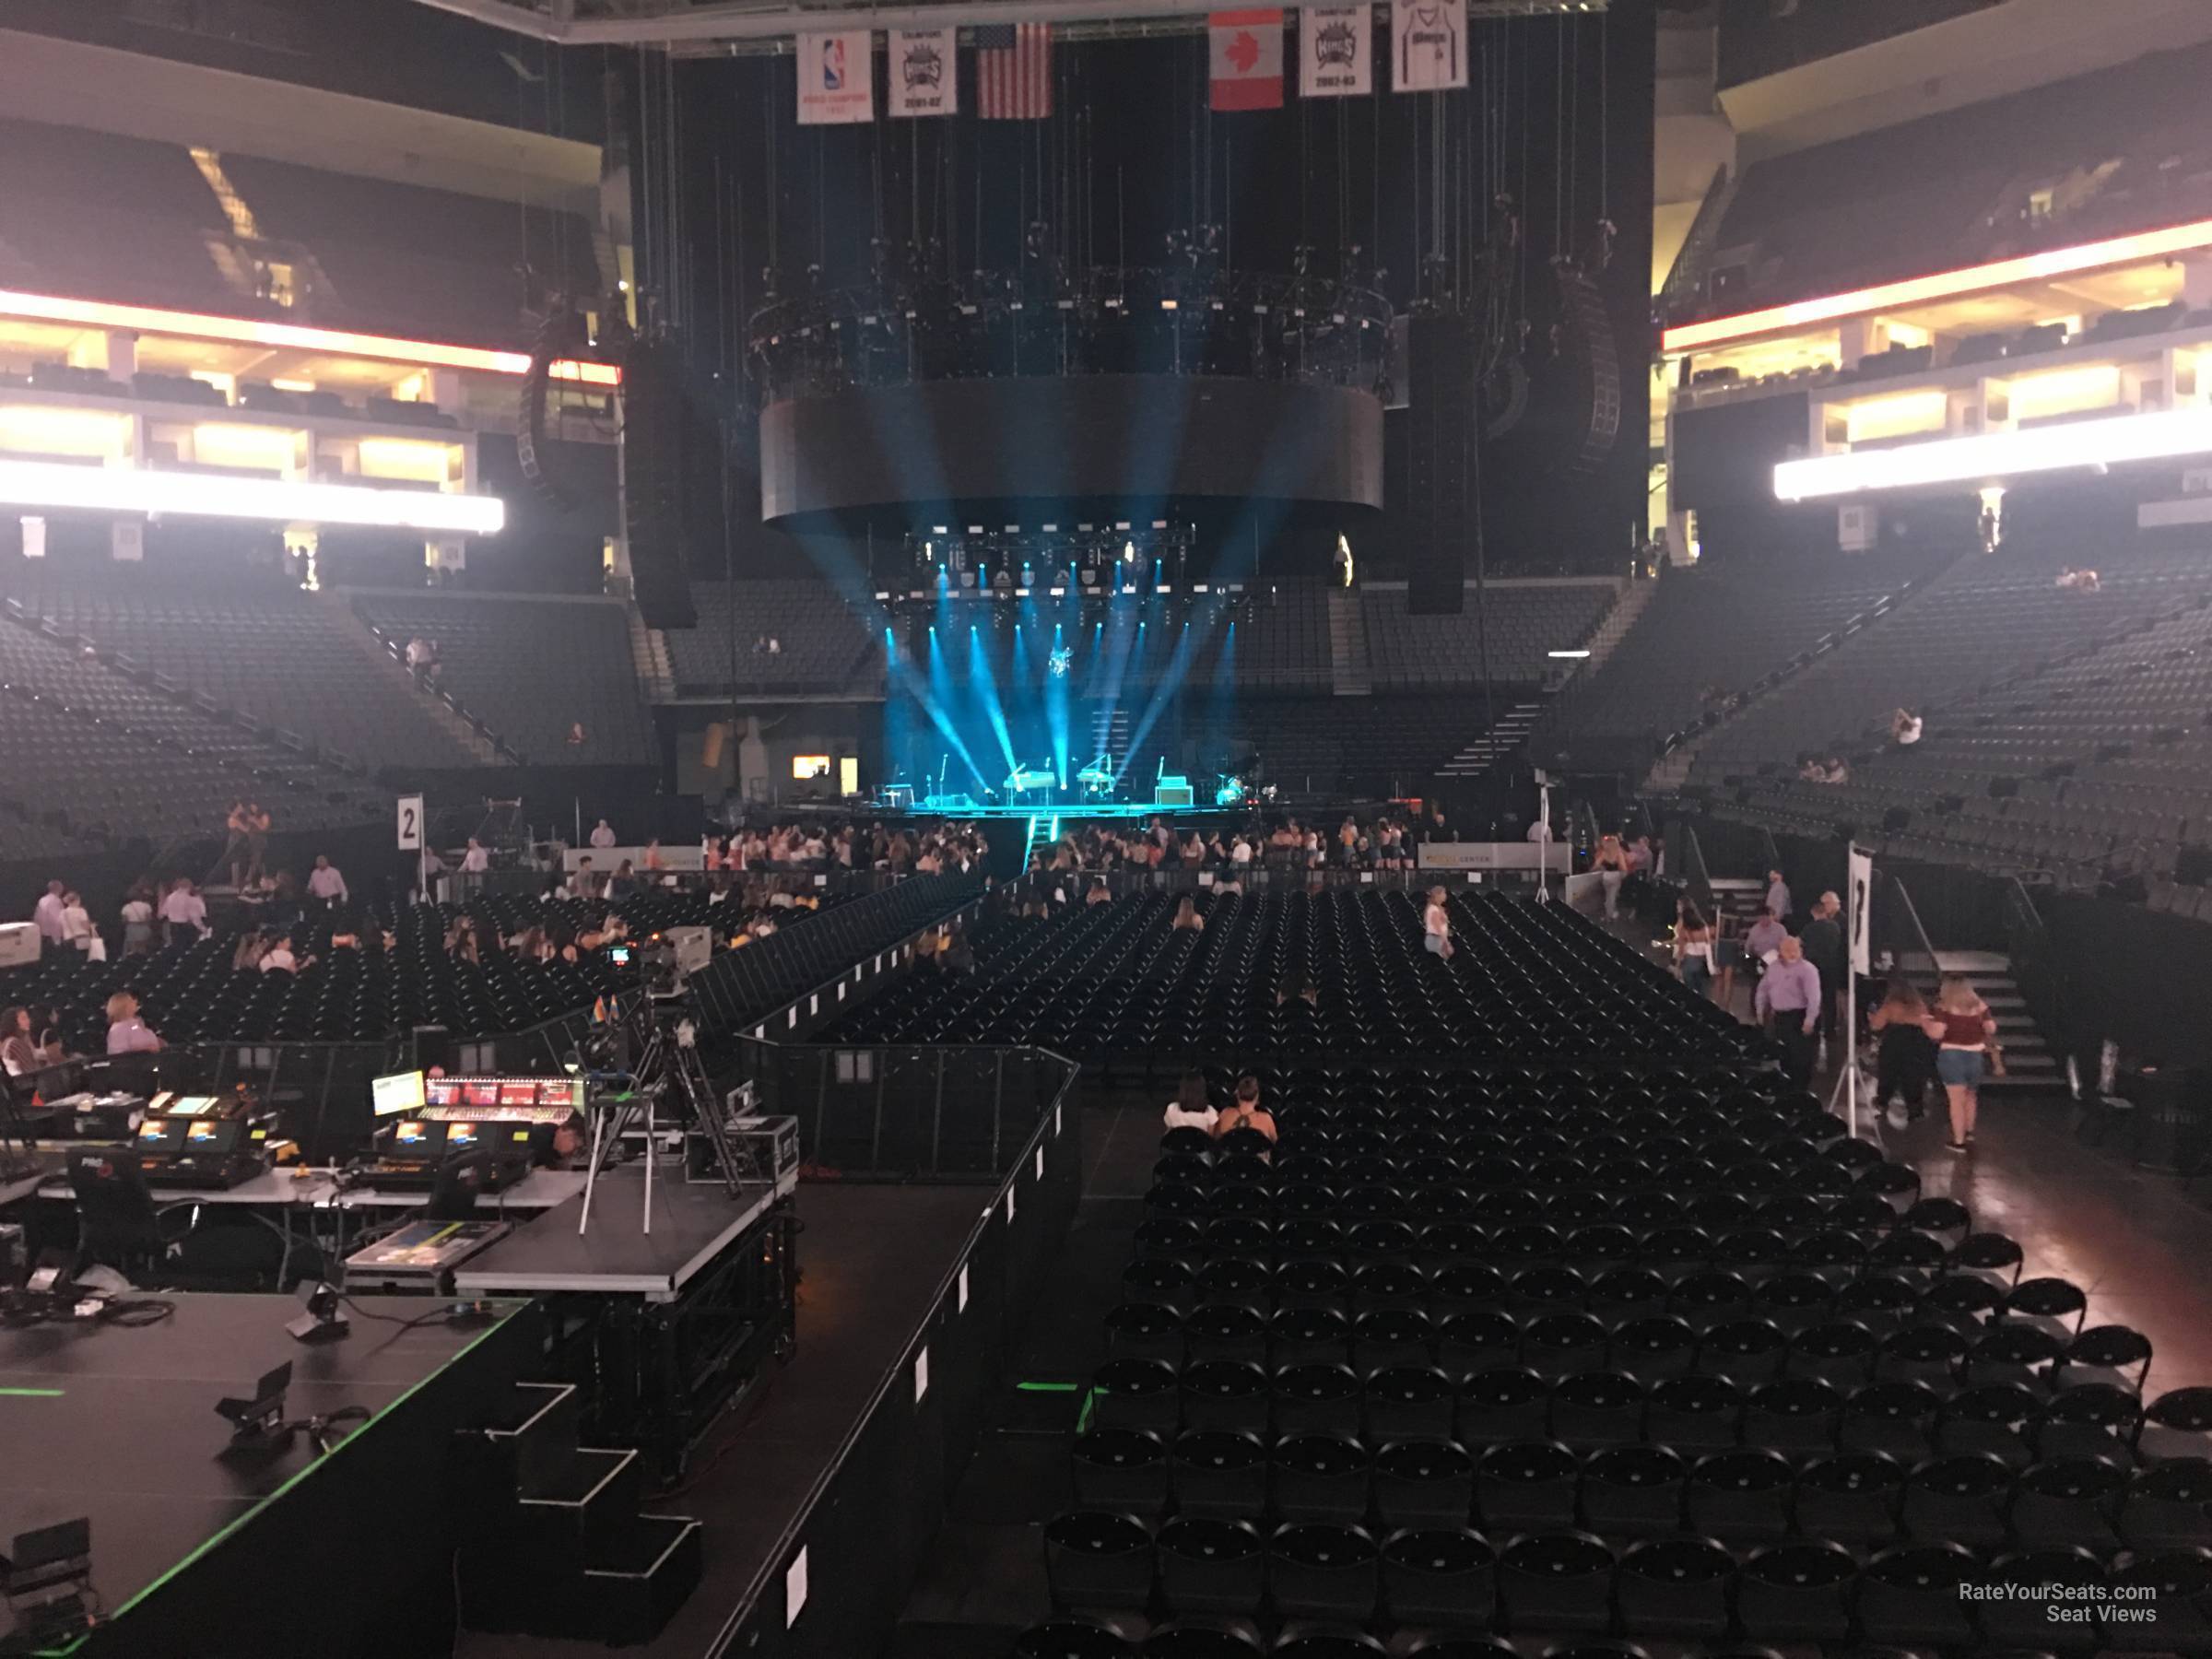 head-on concert view at Golden 1 Center